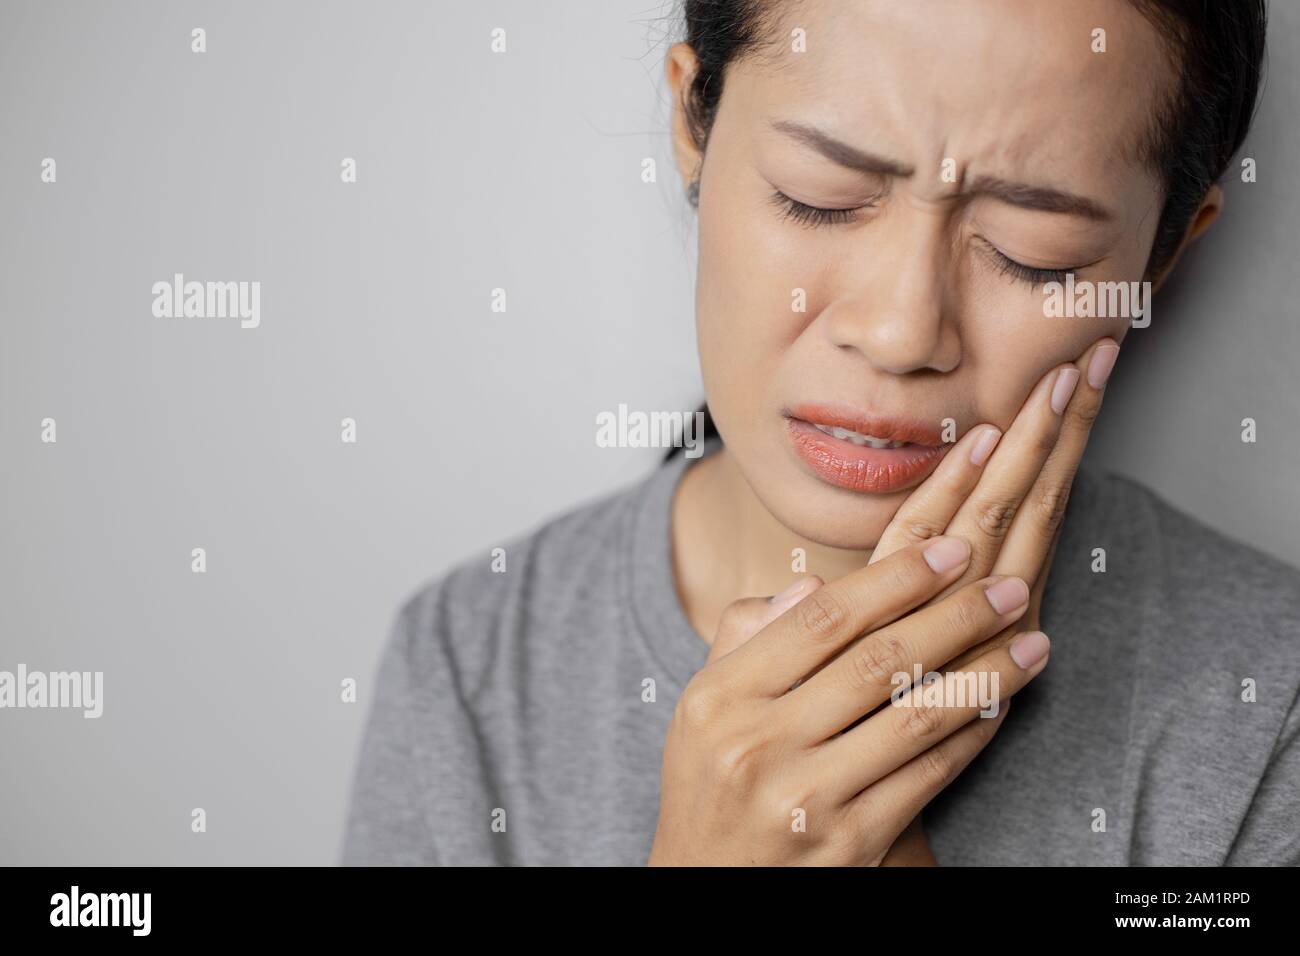 Woman put her hand on her cheek due to toothache. Asian  woman is suffering of toothache. Young woman with of toothache on a gray background. Stock Photo